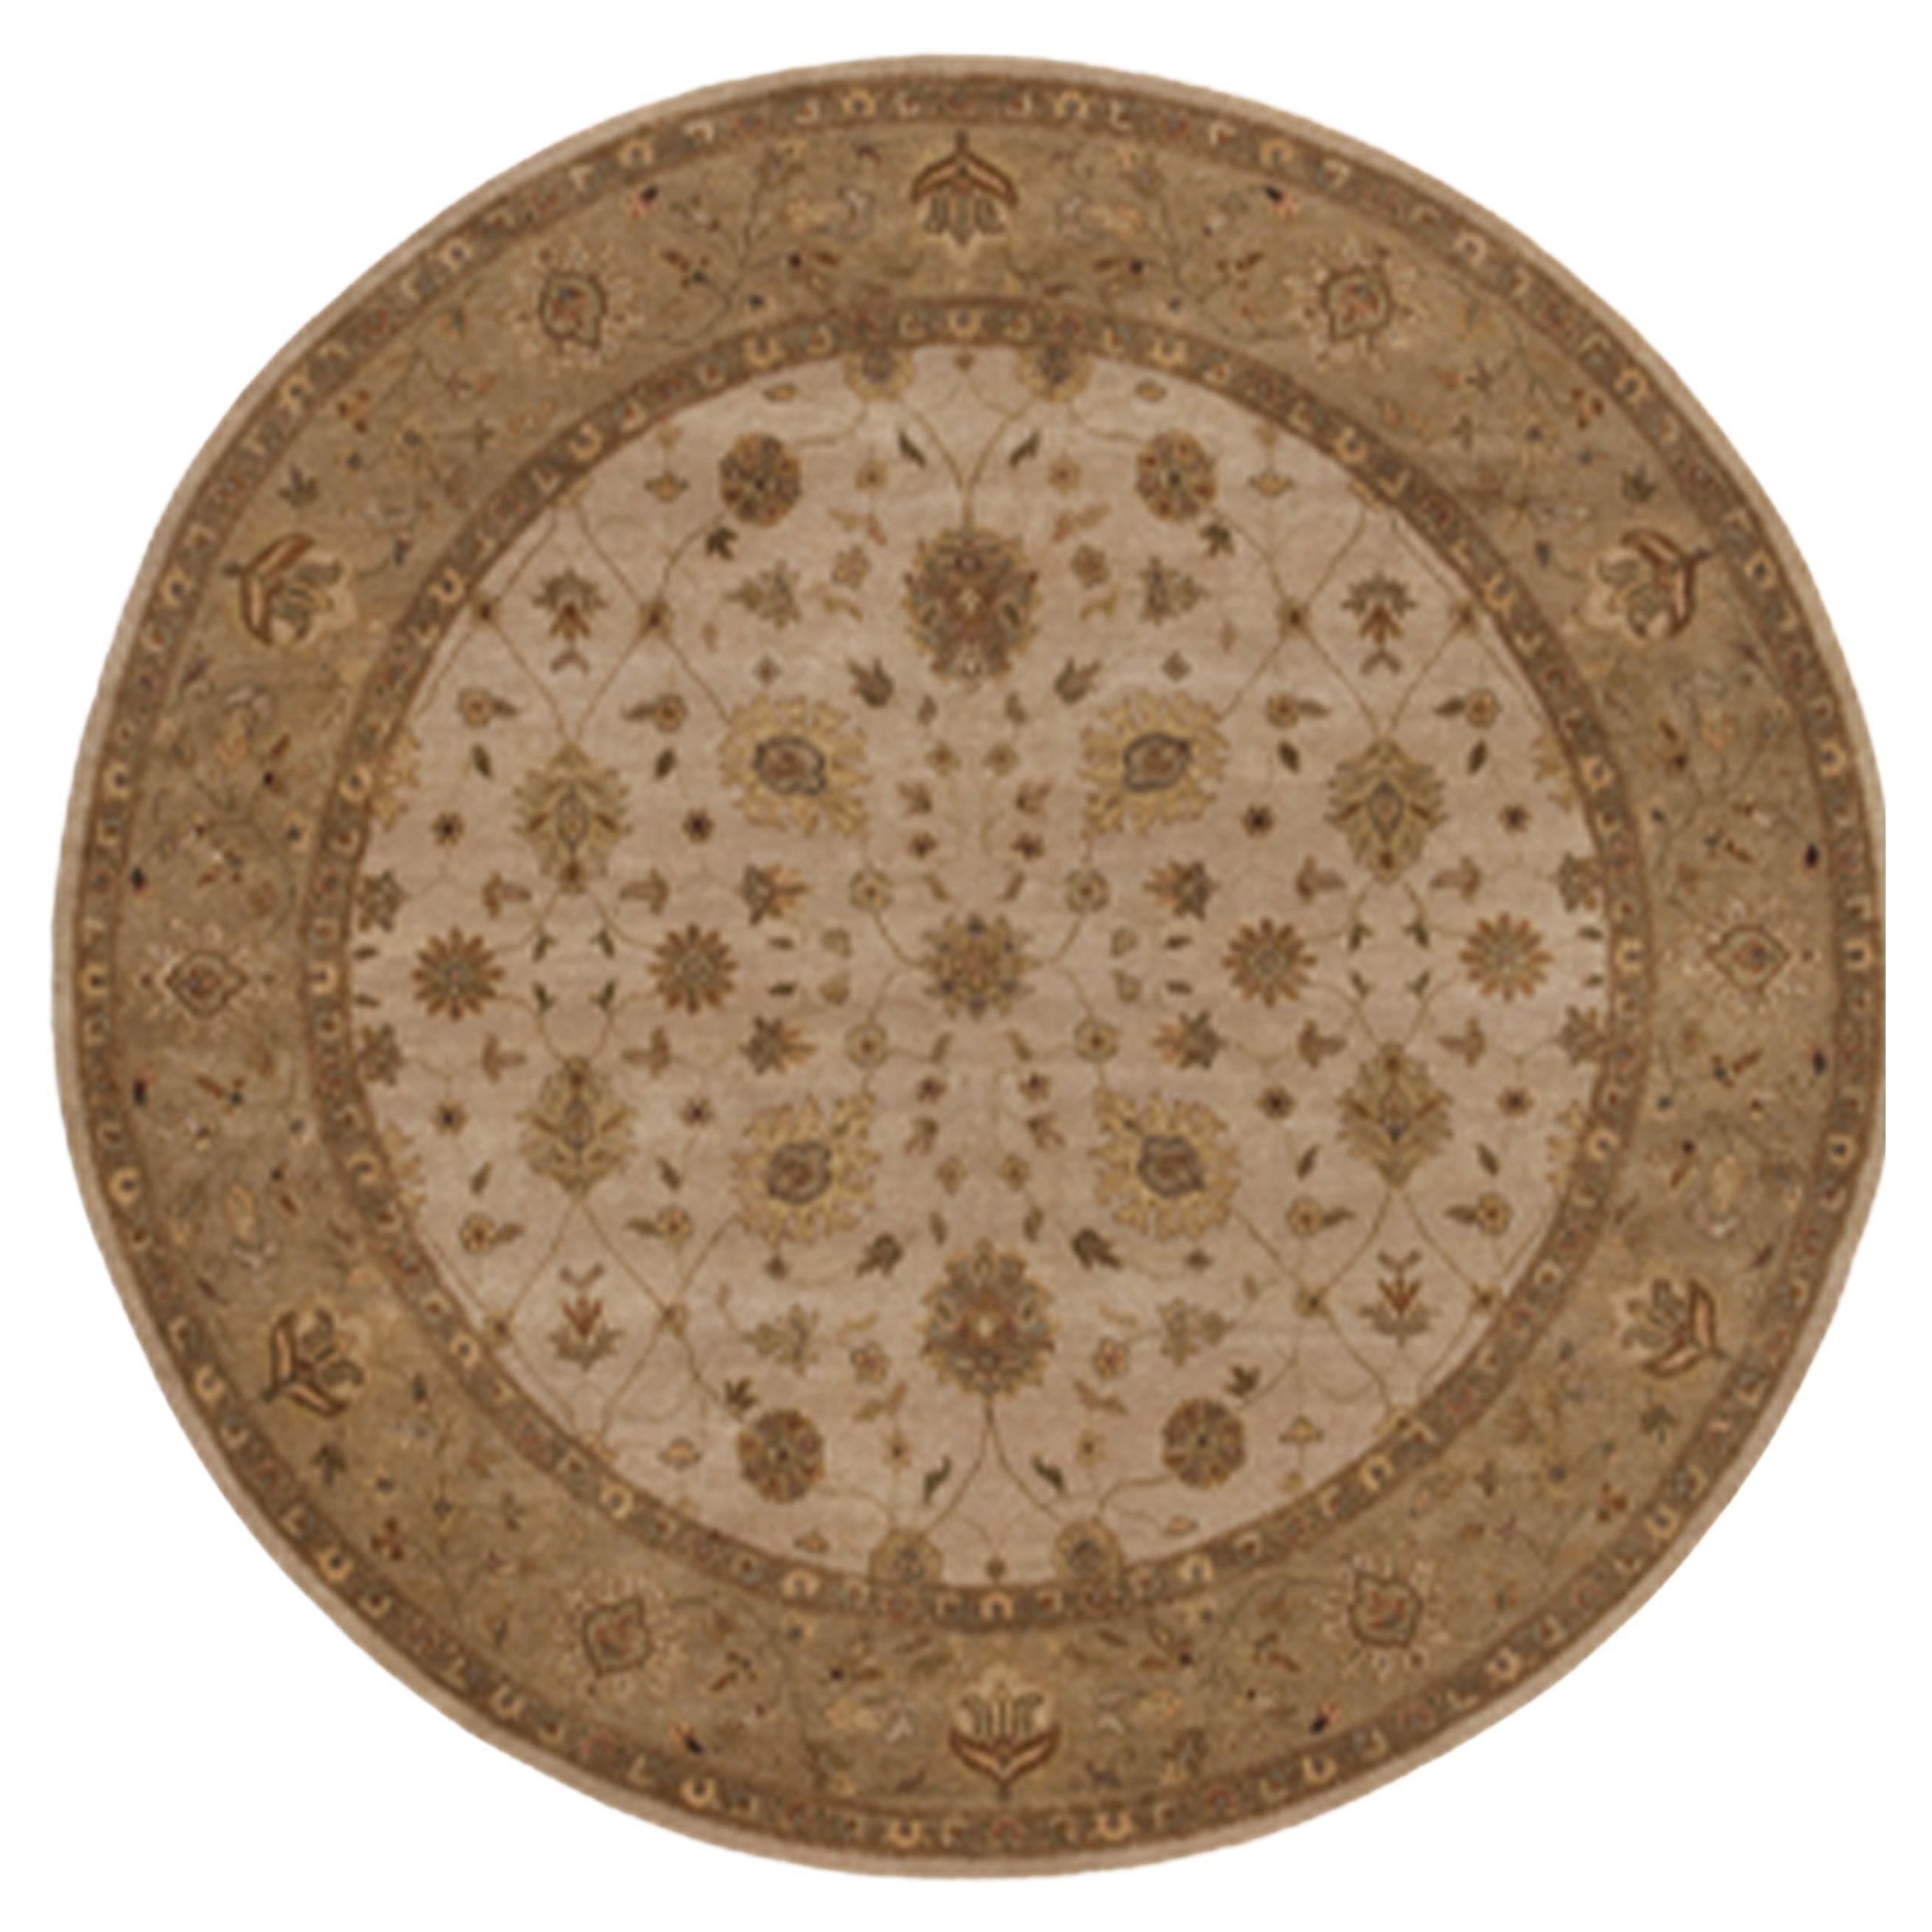 Luxury Traditional Hand-Knotted Amritsar Sultanabad Ivory/Beige 12X12 Round Rug For Sale